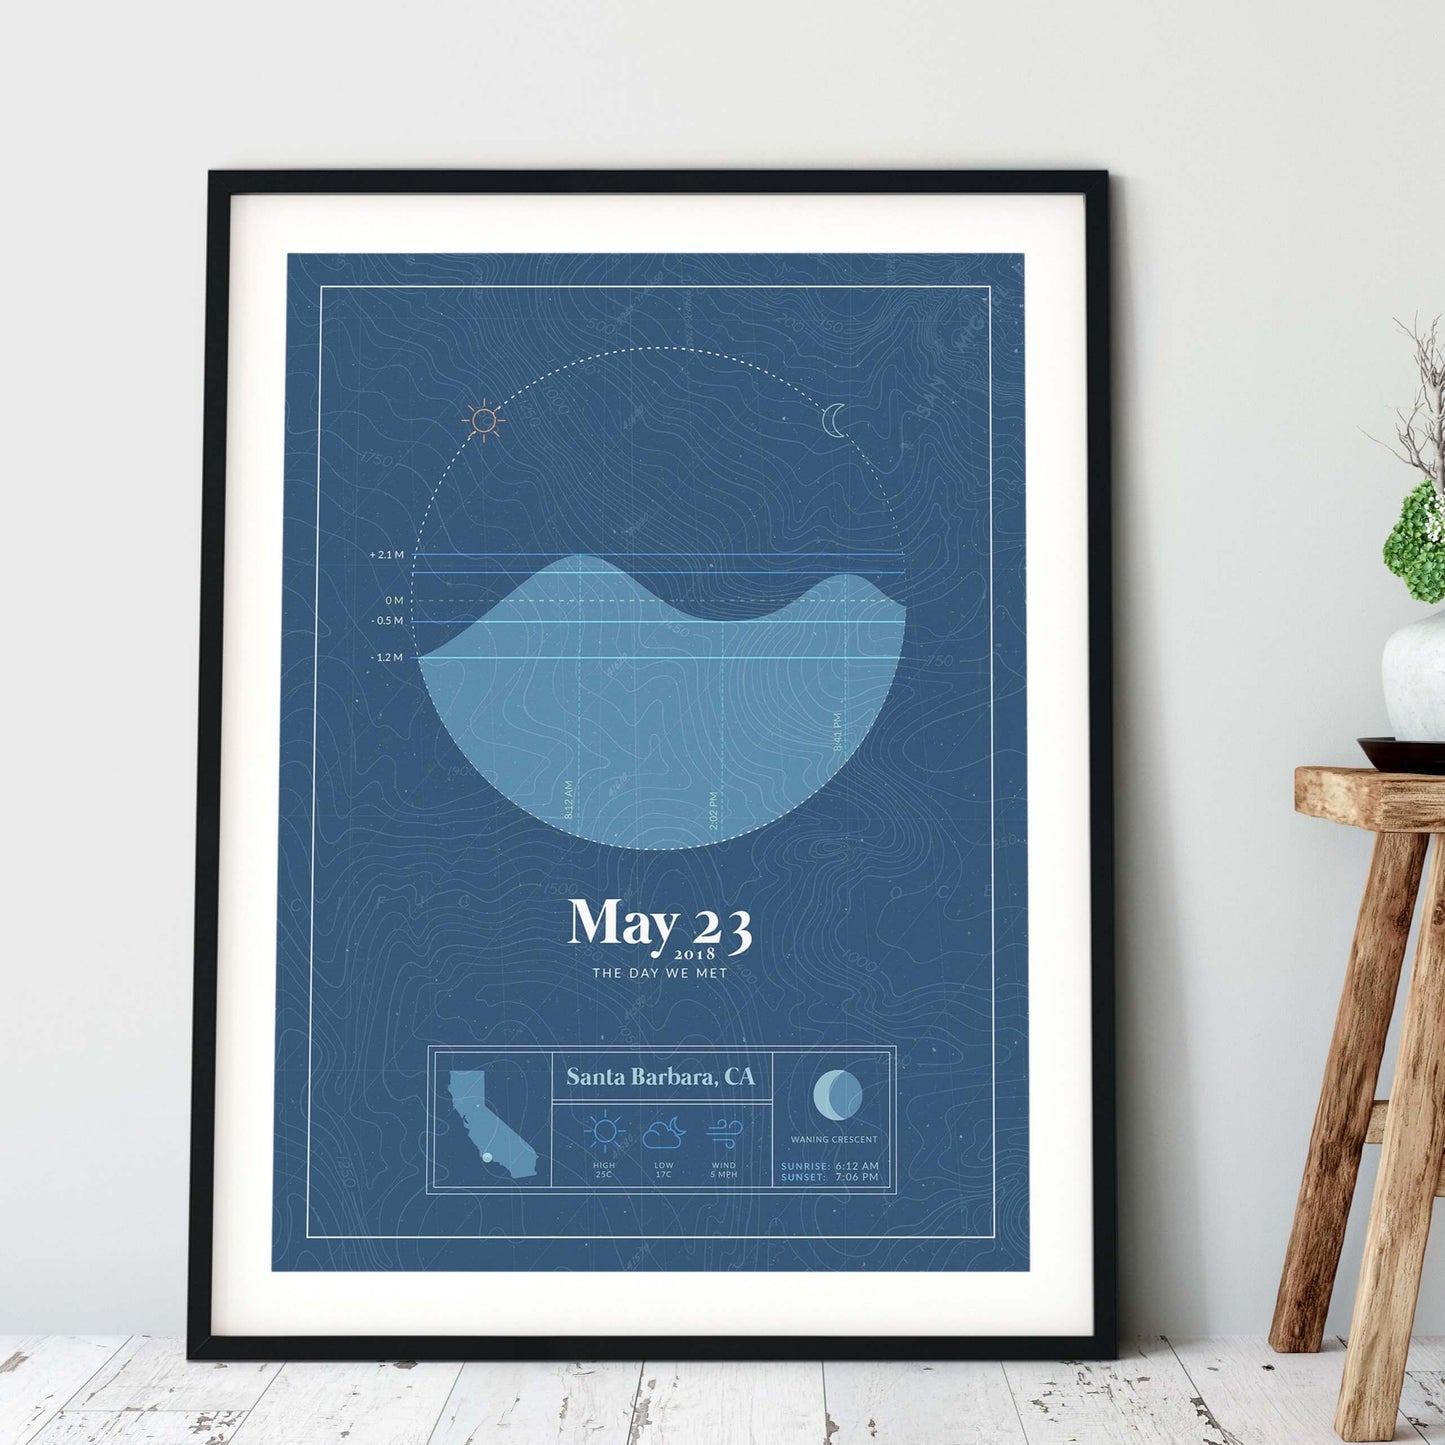 black framed picture of the personalized tide poster by salt atlas in the vintage cobalt color in a home setting. These are custom posters showing the tide, weather, and moon phase for a special day, like an anniversary or birthday.